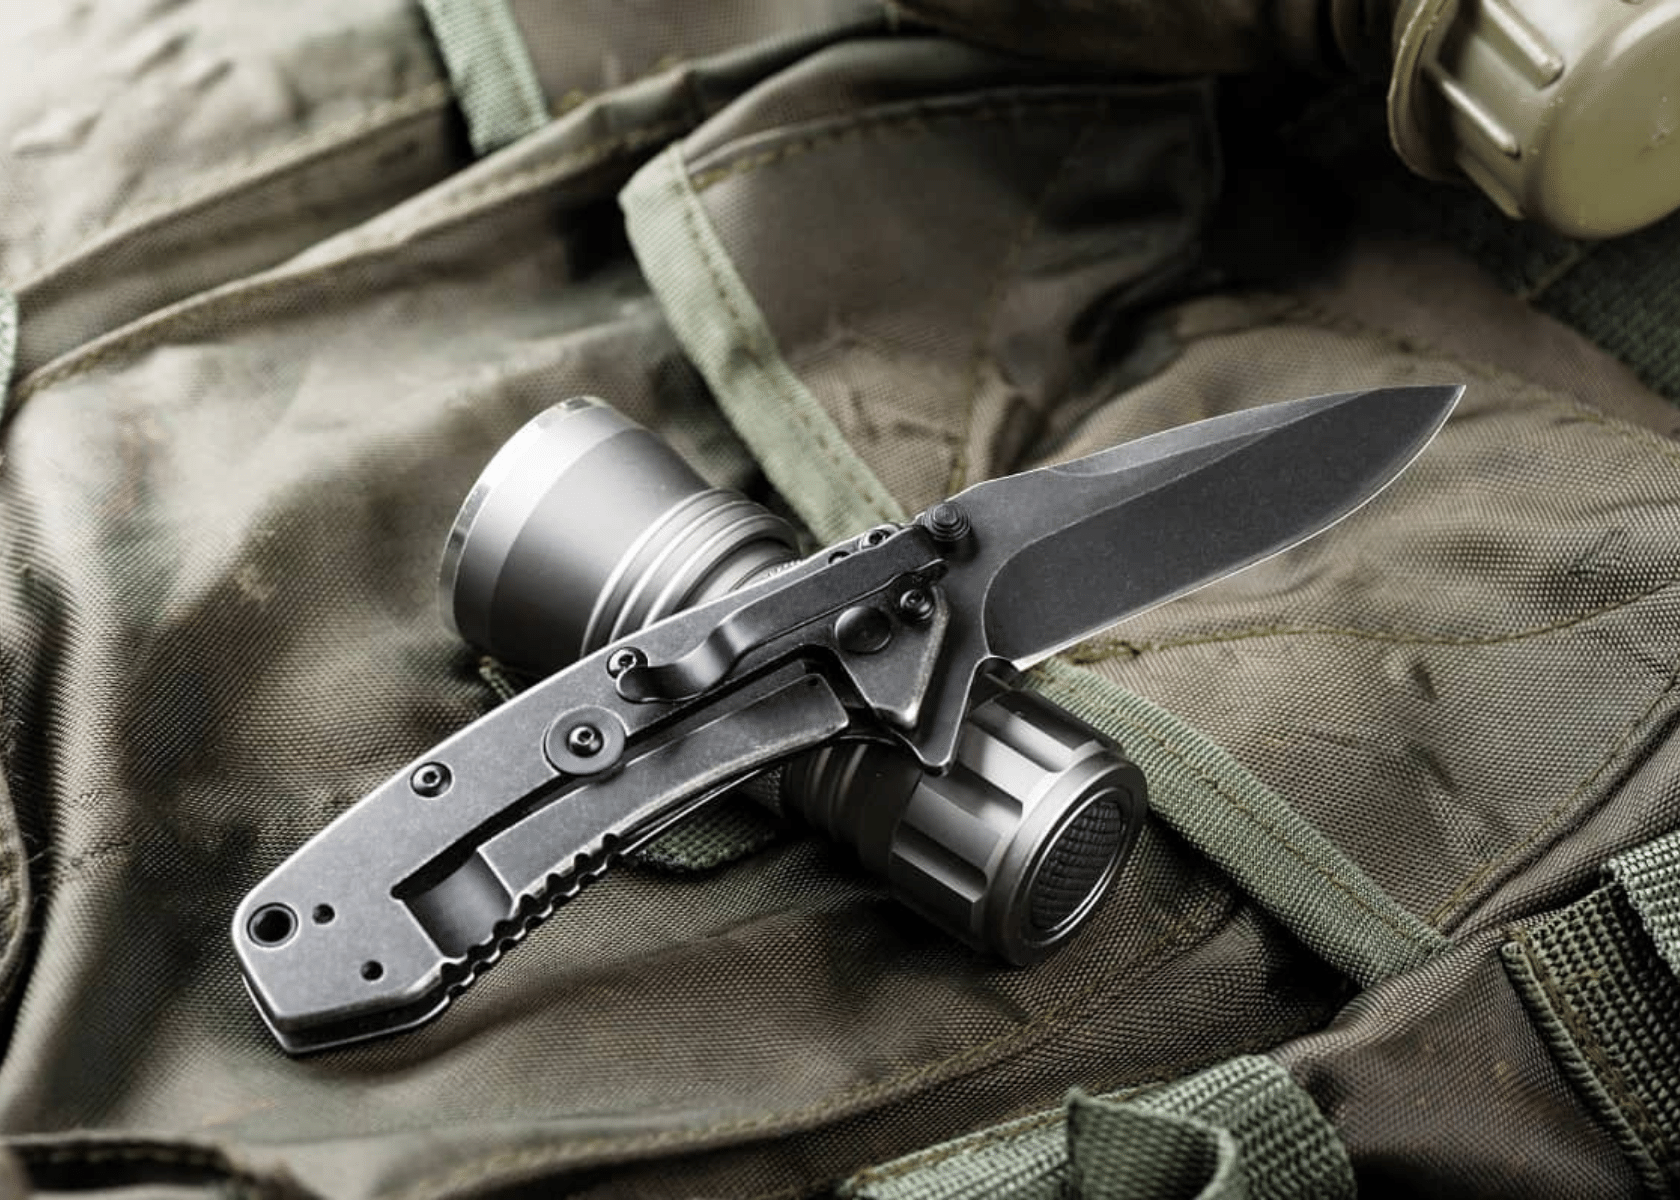 Black tactical knife, open, with a small flashlight on a dark backpack